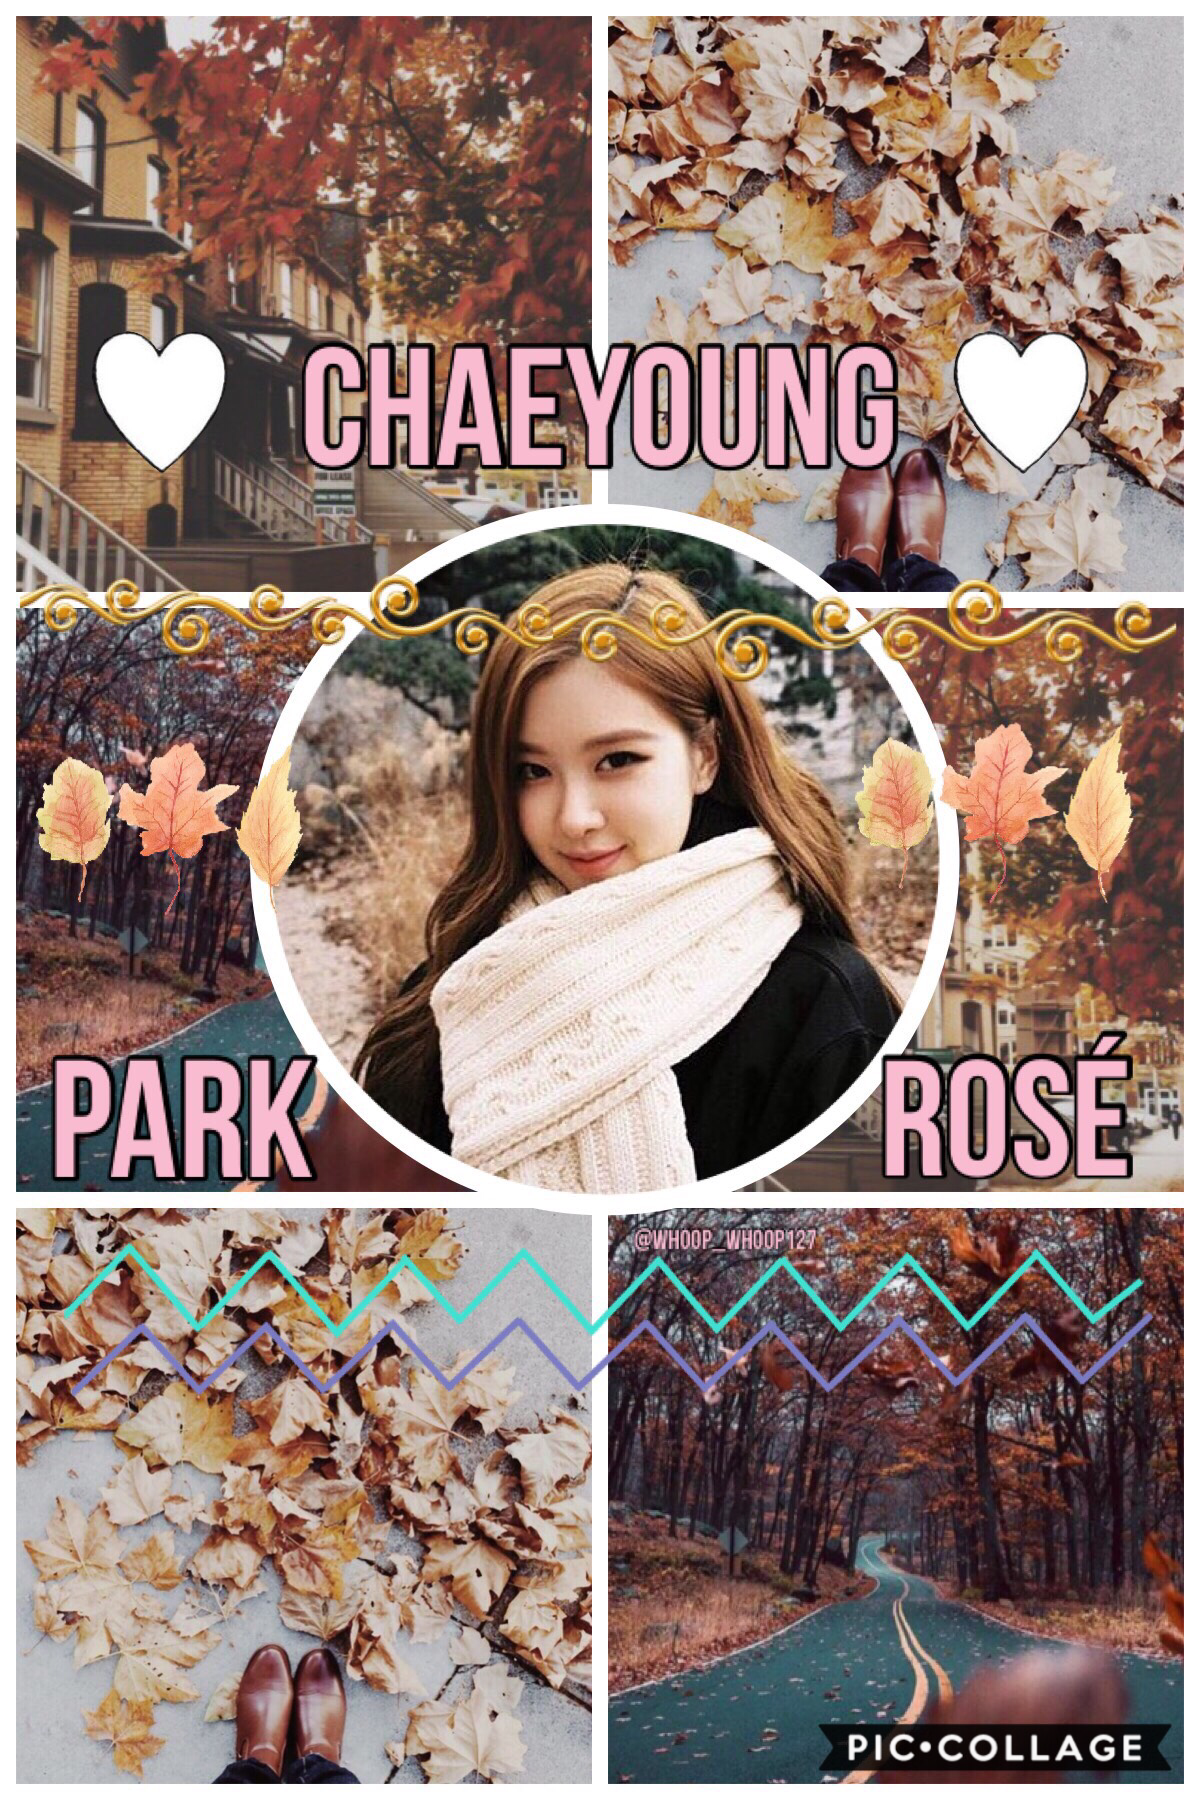 •🚒•
🍂Rose~BlackPink🍂
Edit for my little “sister” @_Mochi_💞❤️❤️❤️❤️💞💞💞💞❤️❤️❤️❤️❤️💞❤️❤️❤️ uwuwuwuwuwwuwuwuwwuwu
Lolololol
Sorry, aren’t we all soft for Mochi?
Hope you like it:)
💓💓💓💓💓💓💓💓